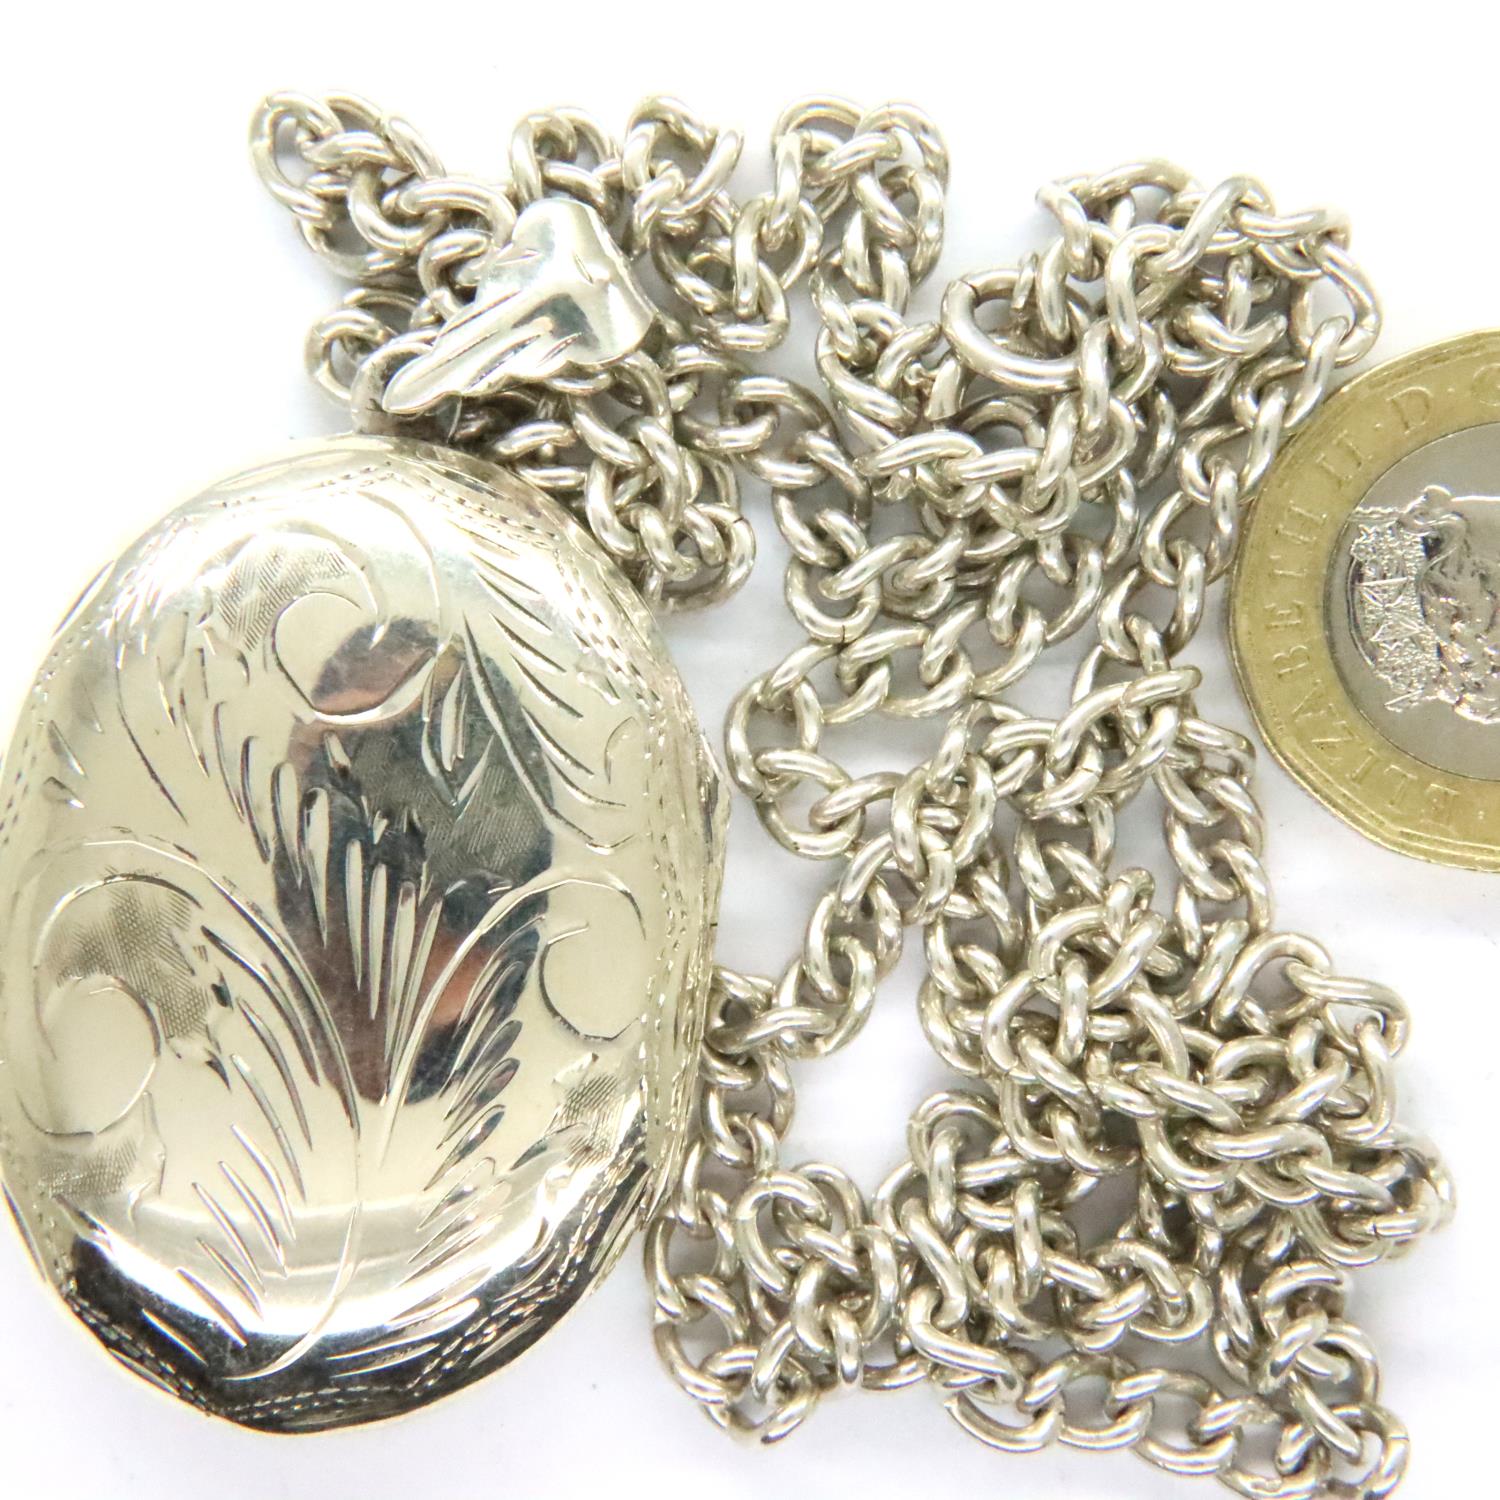 925 silver locket and neck chain. Pendant H: 4 cm, chain L: 58 cm. P&P Group 1 (£14+VAT for the